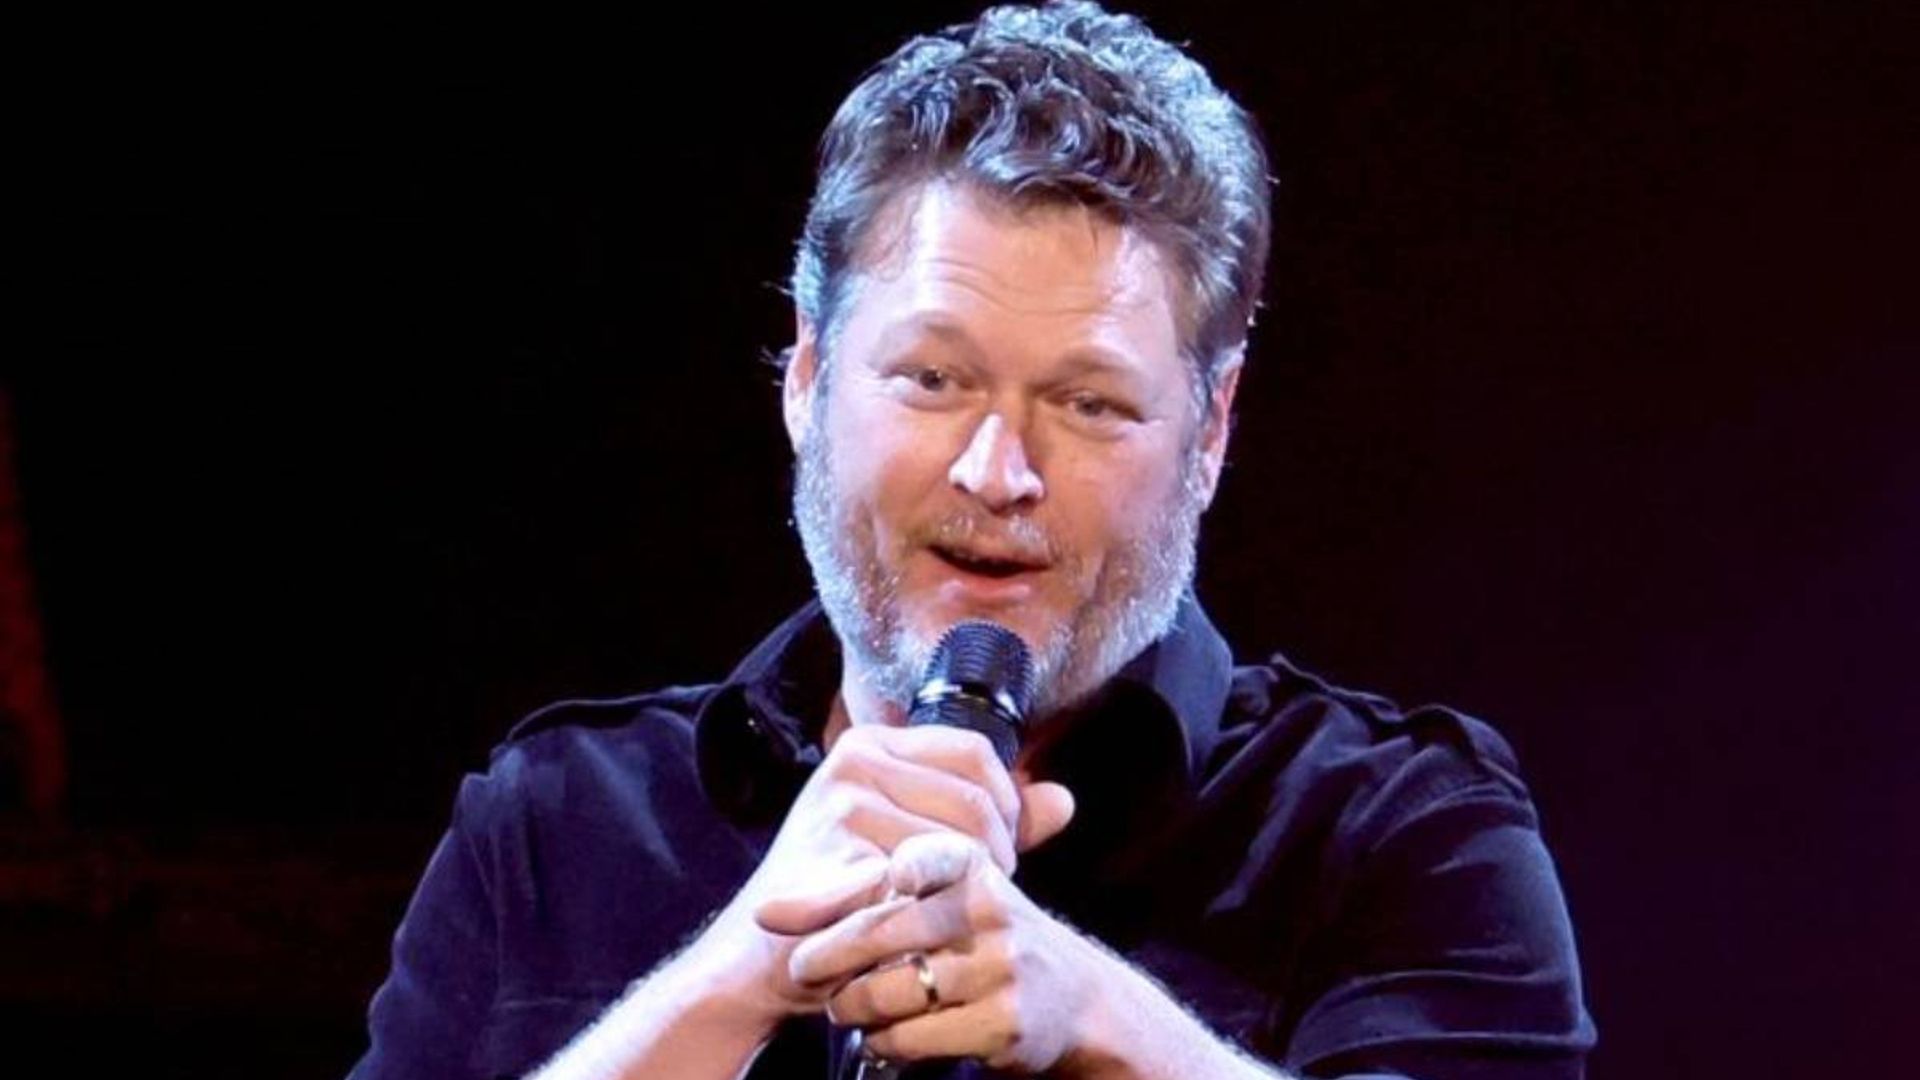 Blake Shelton stuns fans with long wavy mullet and huge sideburns